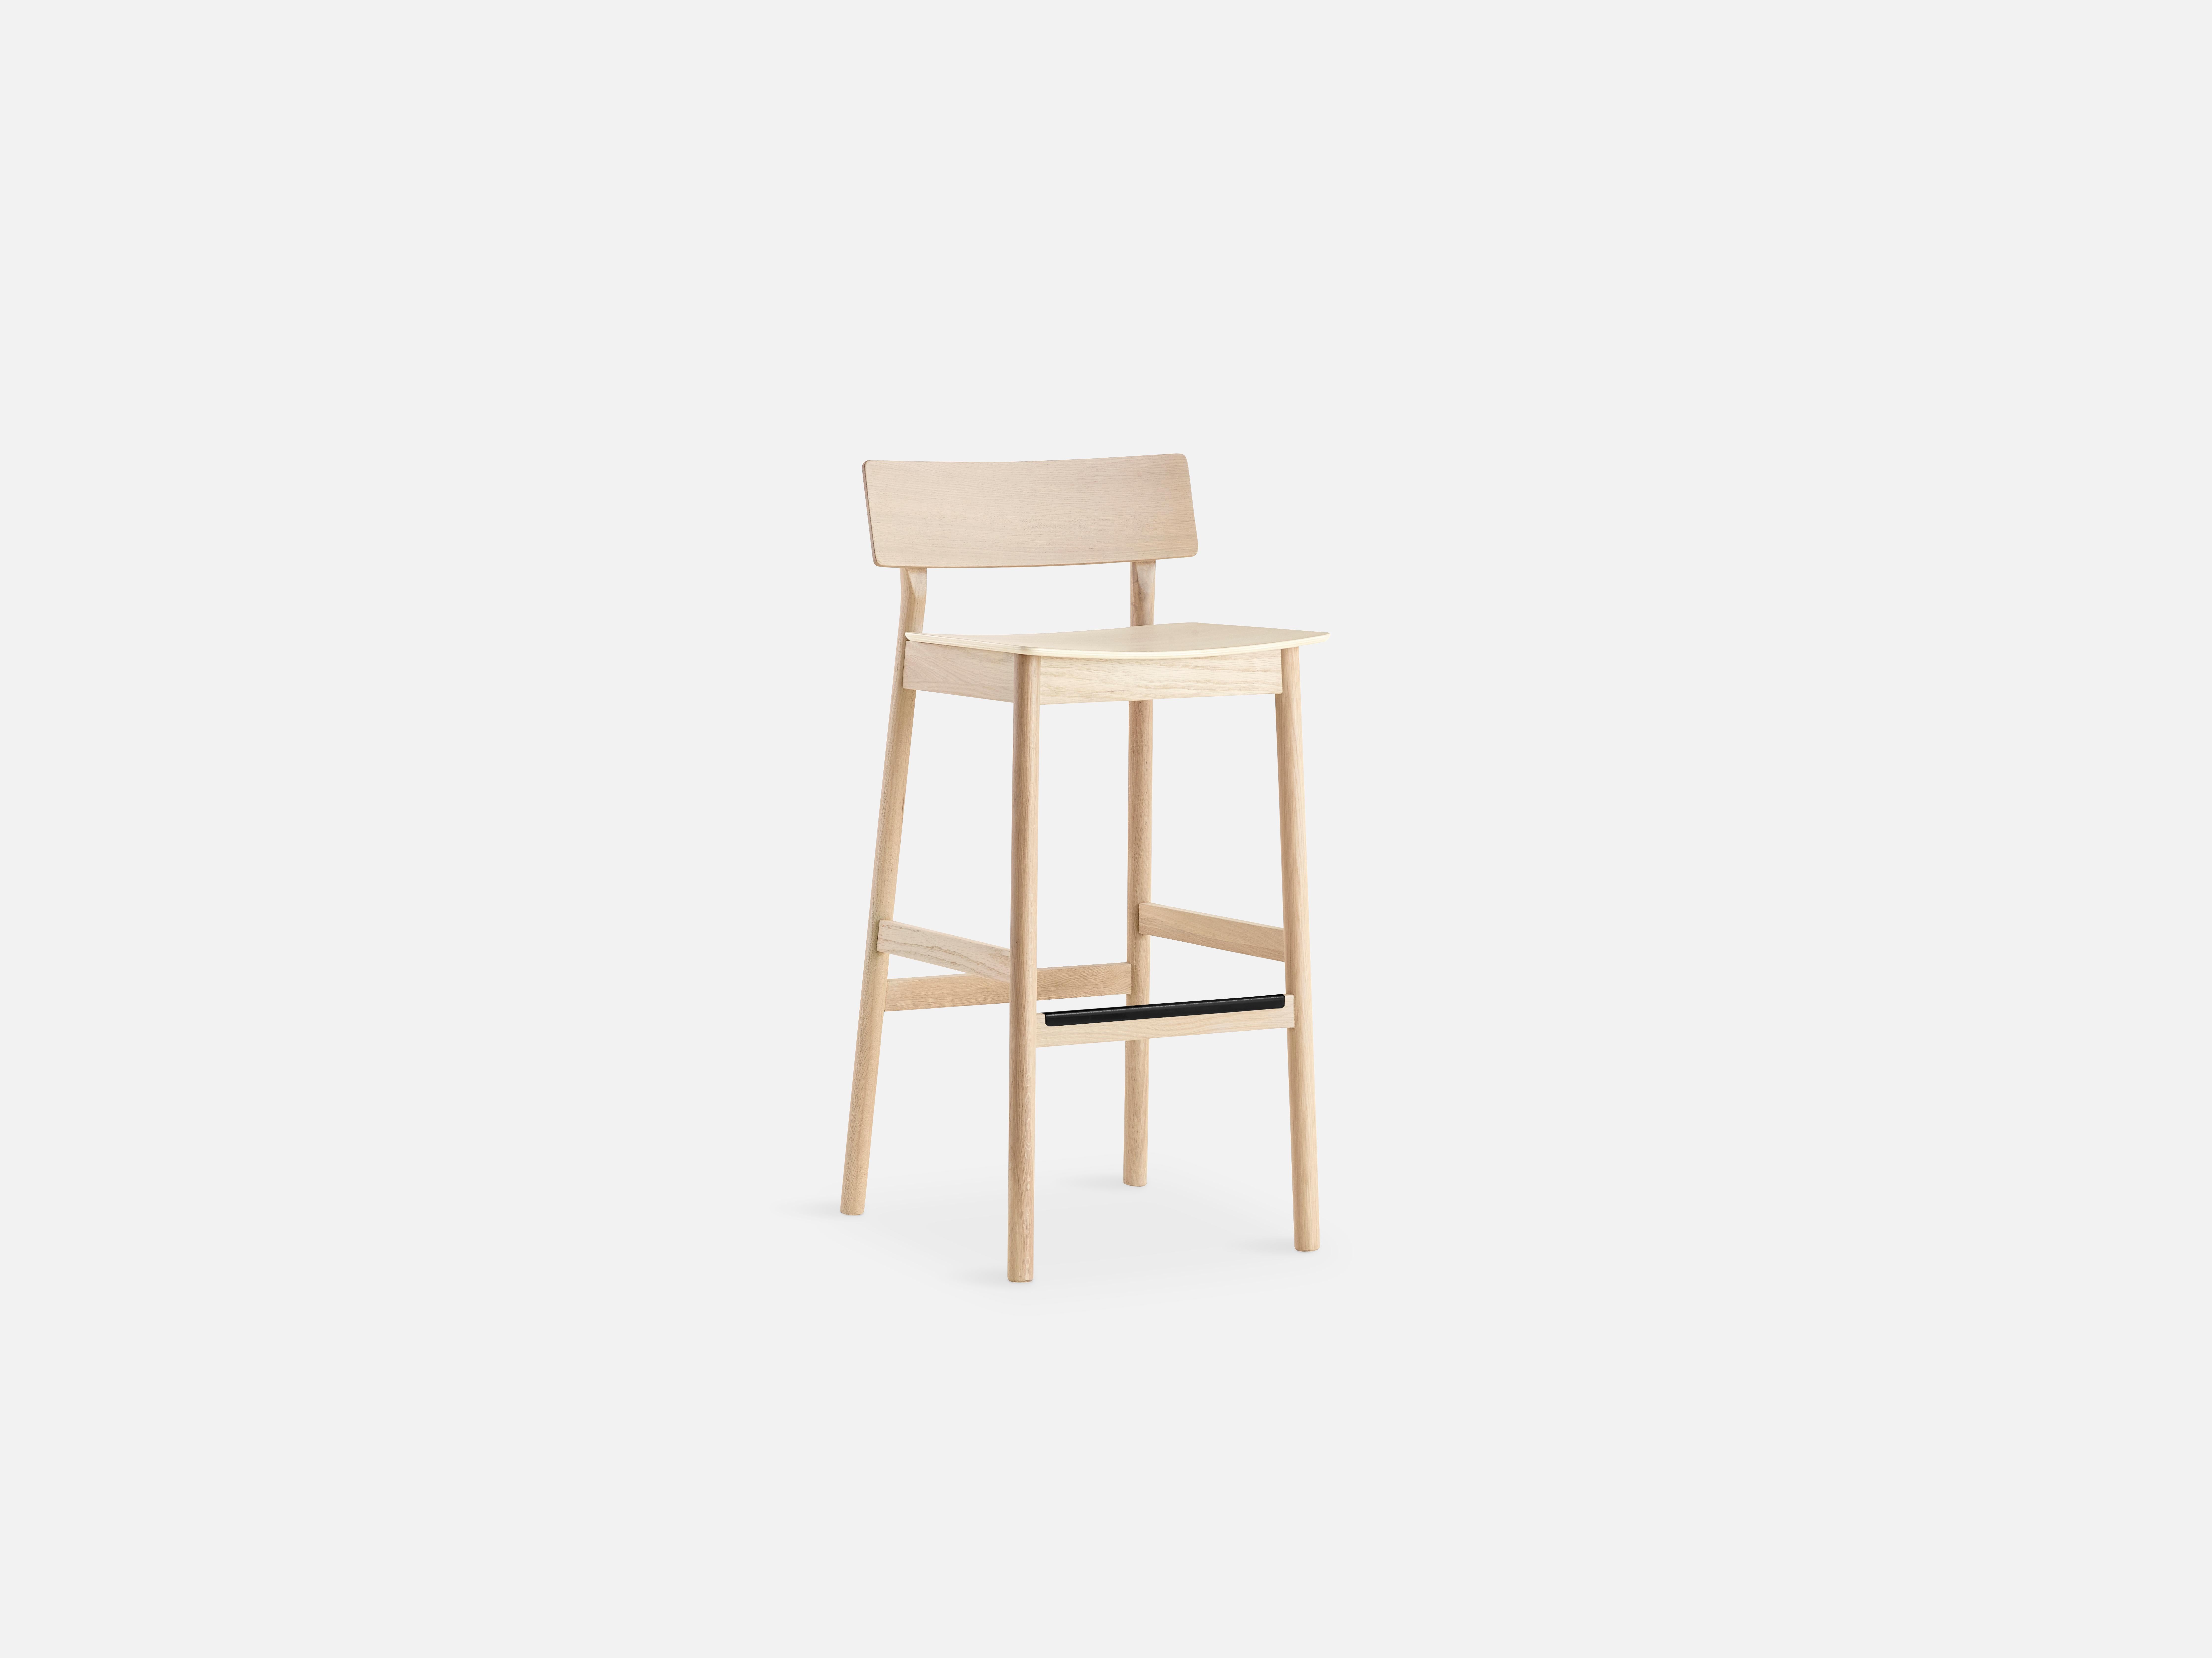 Pause white bar stool 2.0 by Kasper Nyman. 
Materials: Metal, Plywood with Oak Veneer.
Dimensions: D 46.5 x W 45.7 x H 95.3 cm.

The founders, Mia and Torben Koed, decided to put their 30 years of experience into a new project. It was time for a